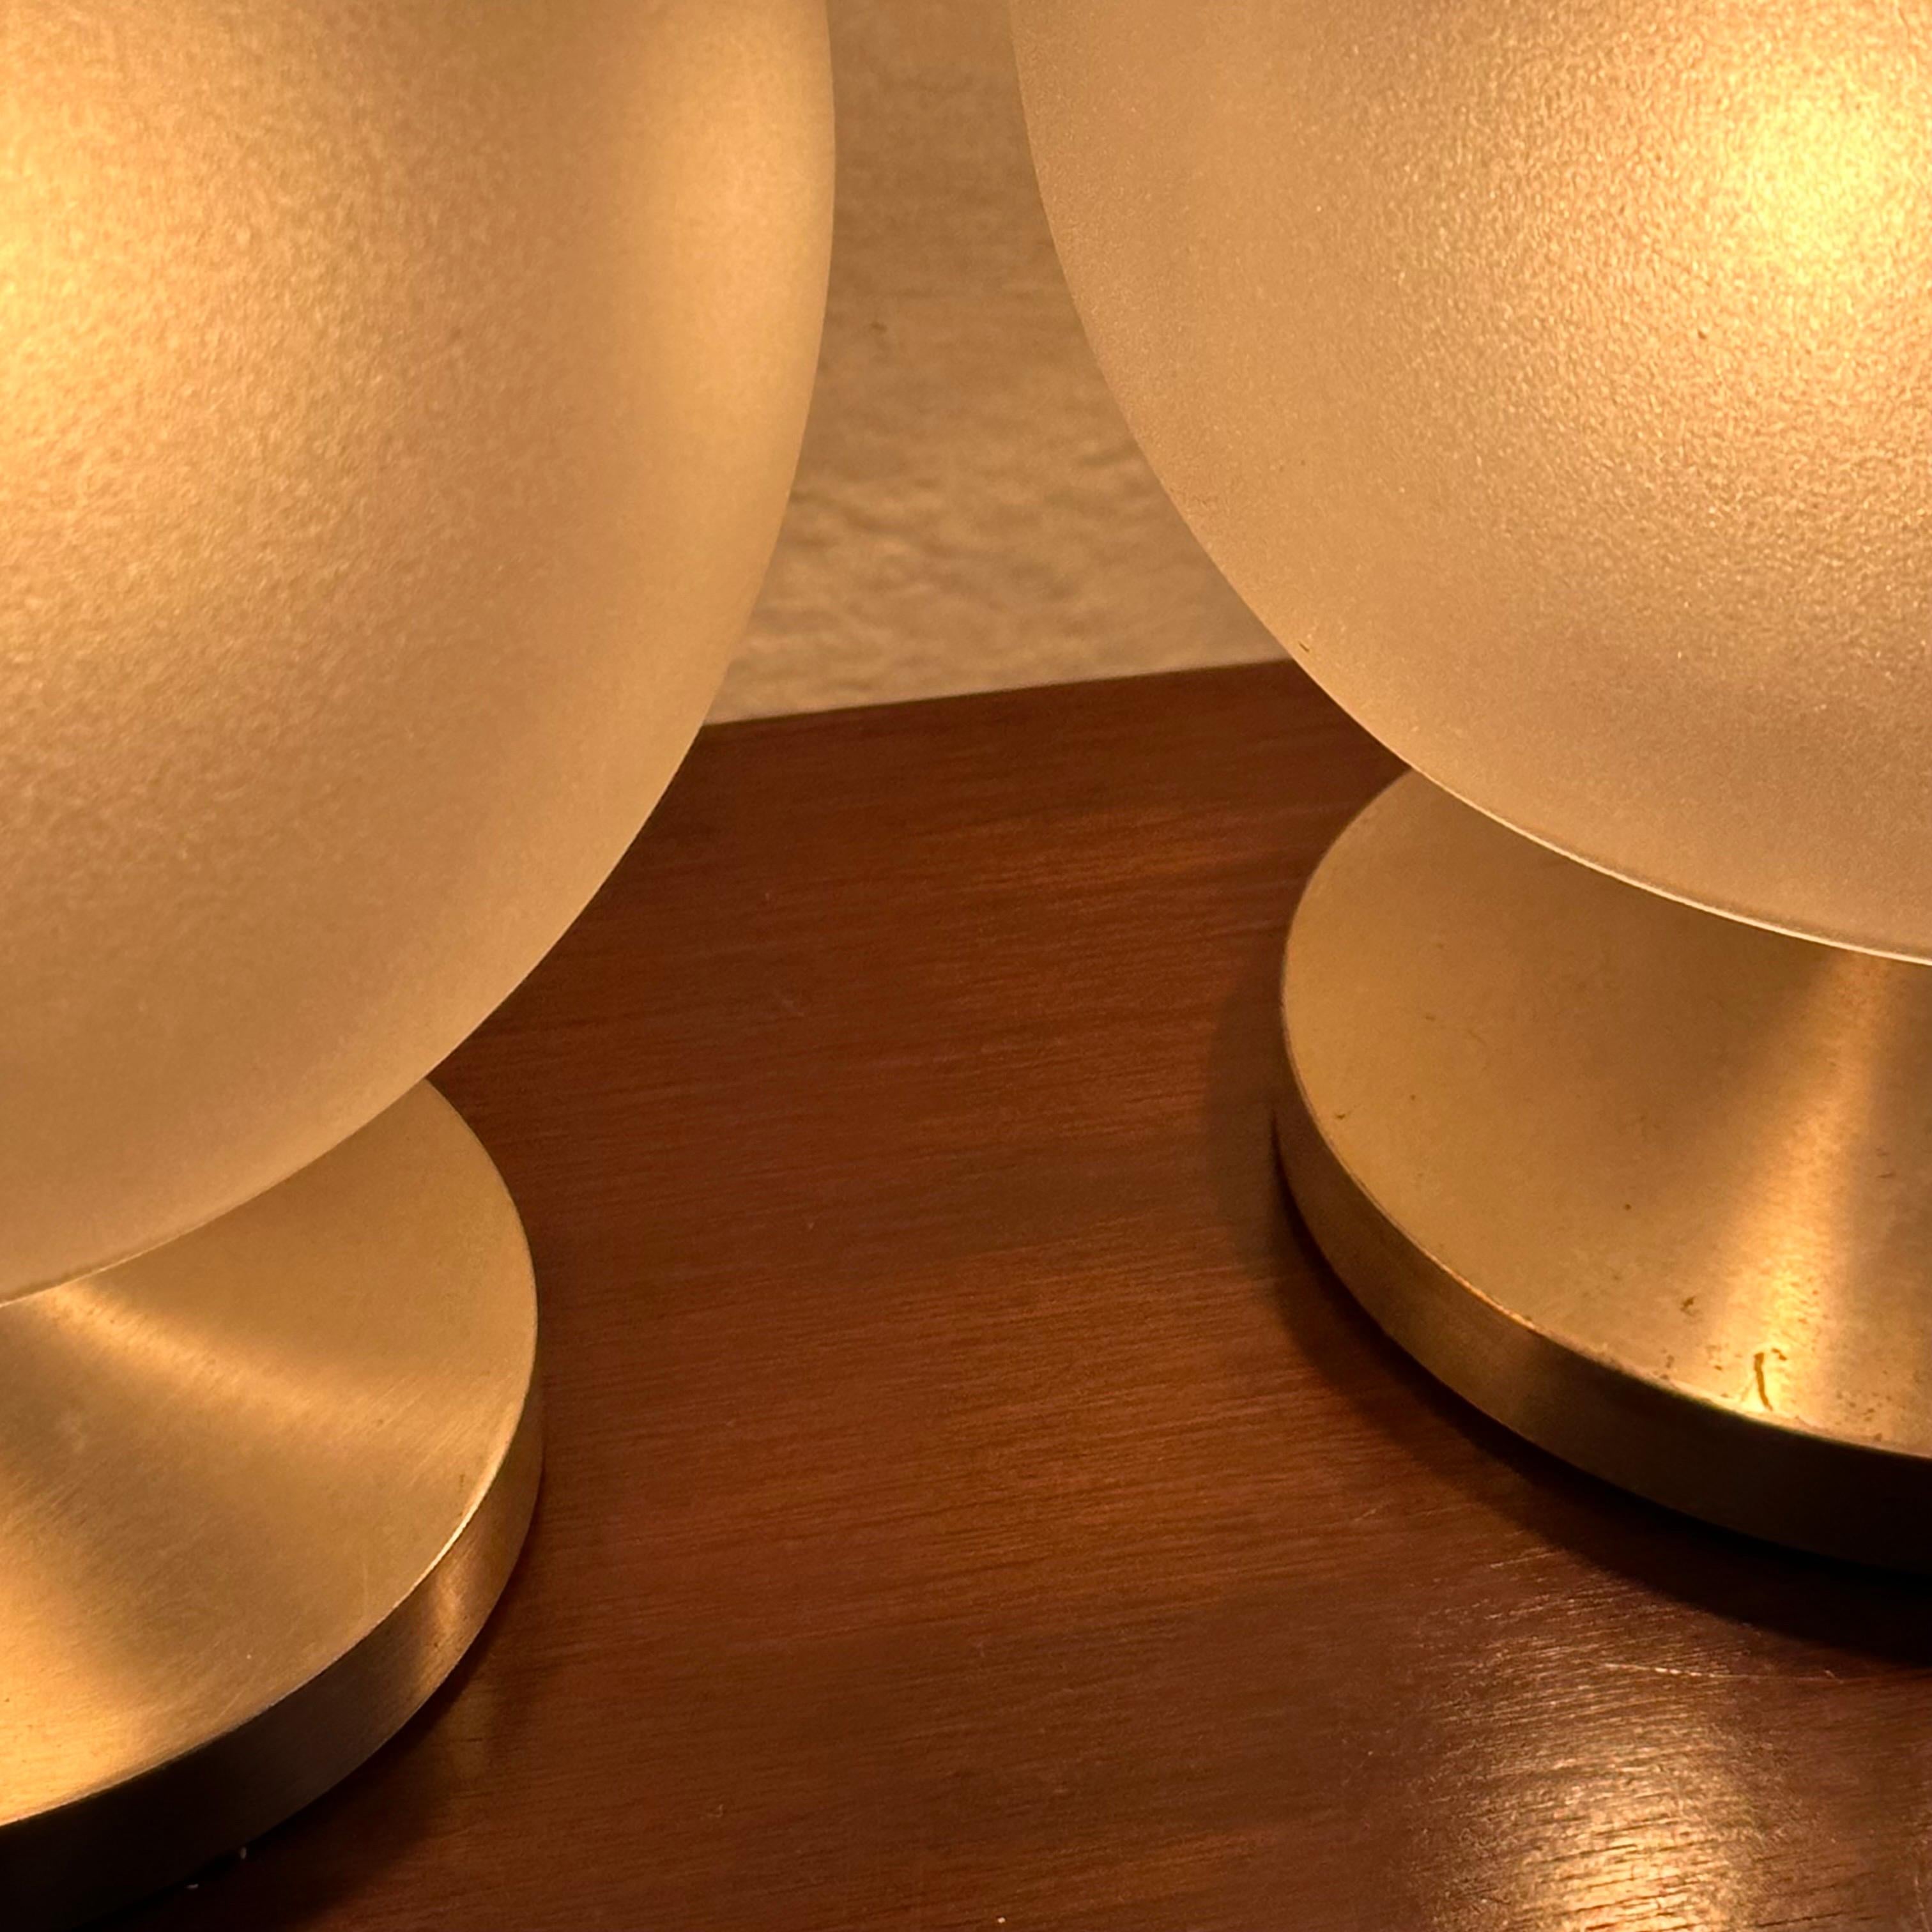 Mid-Century Modern Pair of “Chi” Lamps by Emma Gismondi Schweinberger for Artemide, 1960s